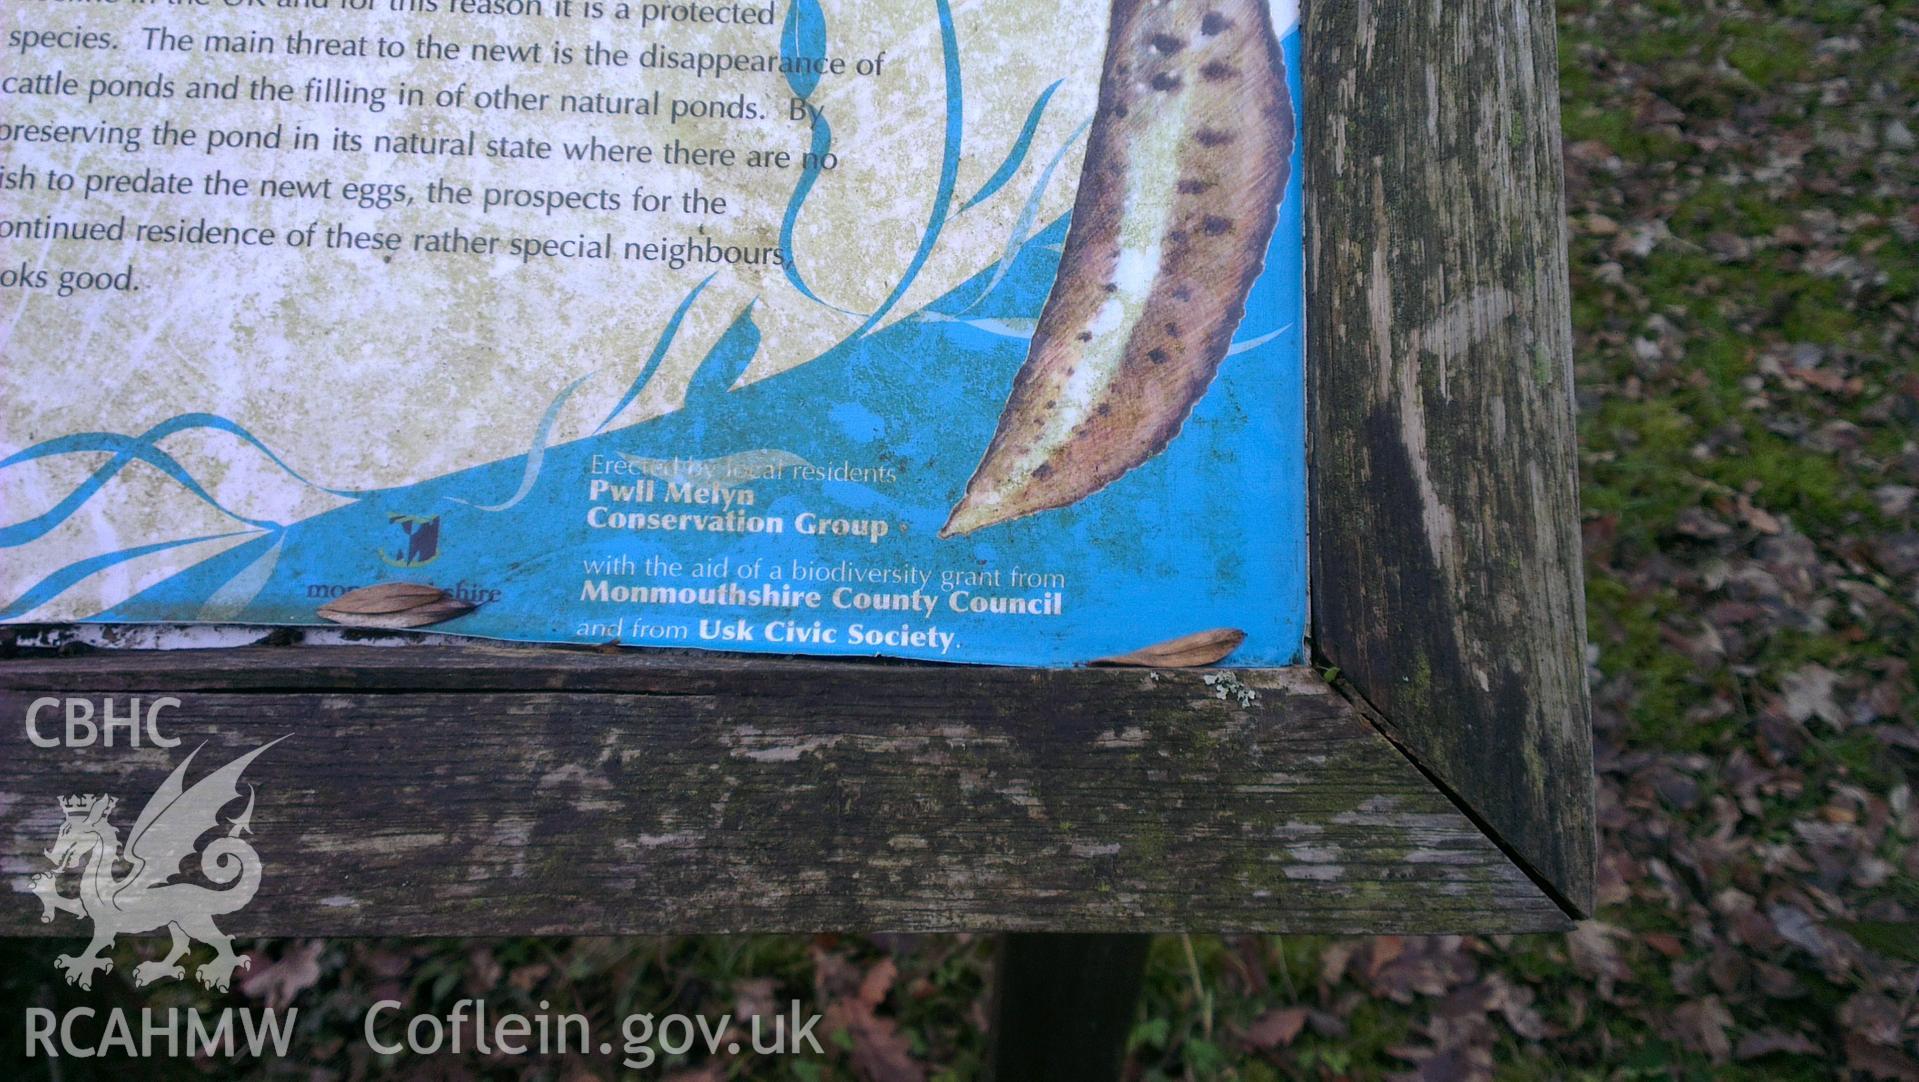 Digital colour photograph of lower right-hand corner of information board at Pwll Melyn battlefield. Photographed during Phase 3 of the Welsh Battlefield Metal Detector Survey, carried out by Archaeology Wales, 2012-2014. Project code: 2041 - WBS/12/SUR.